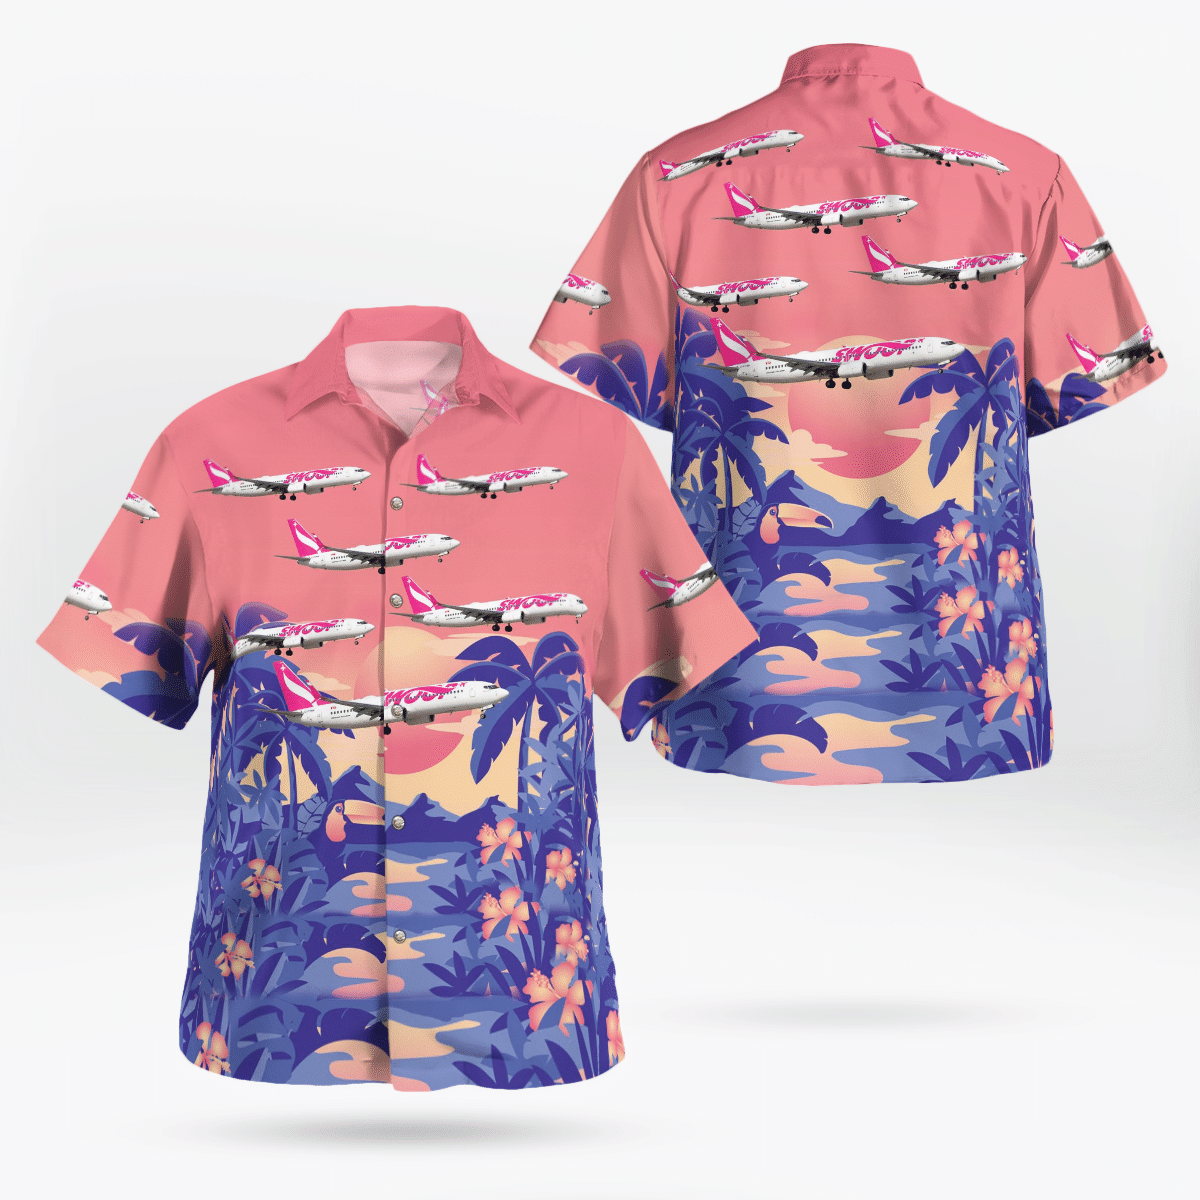 HOT Swoop airline Boeing 737-8CT Tropical Shirt2